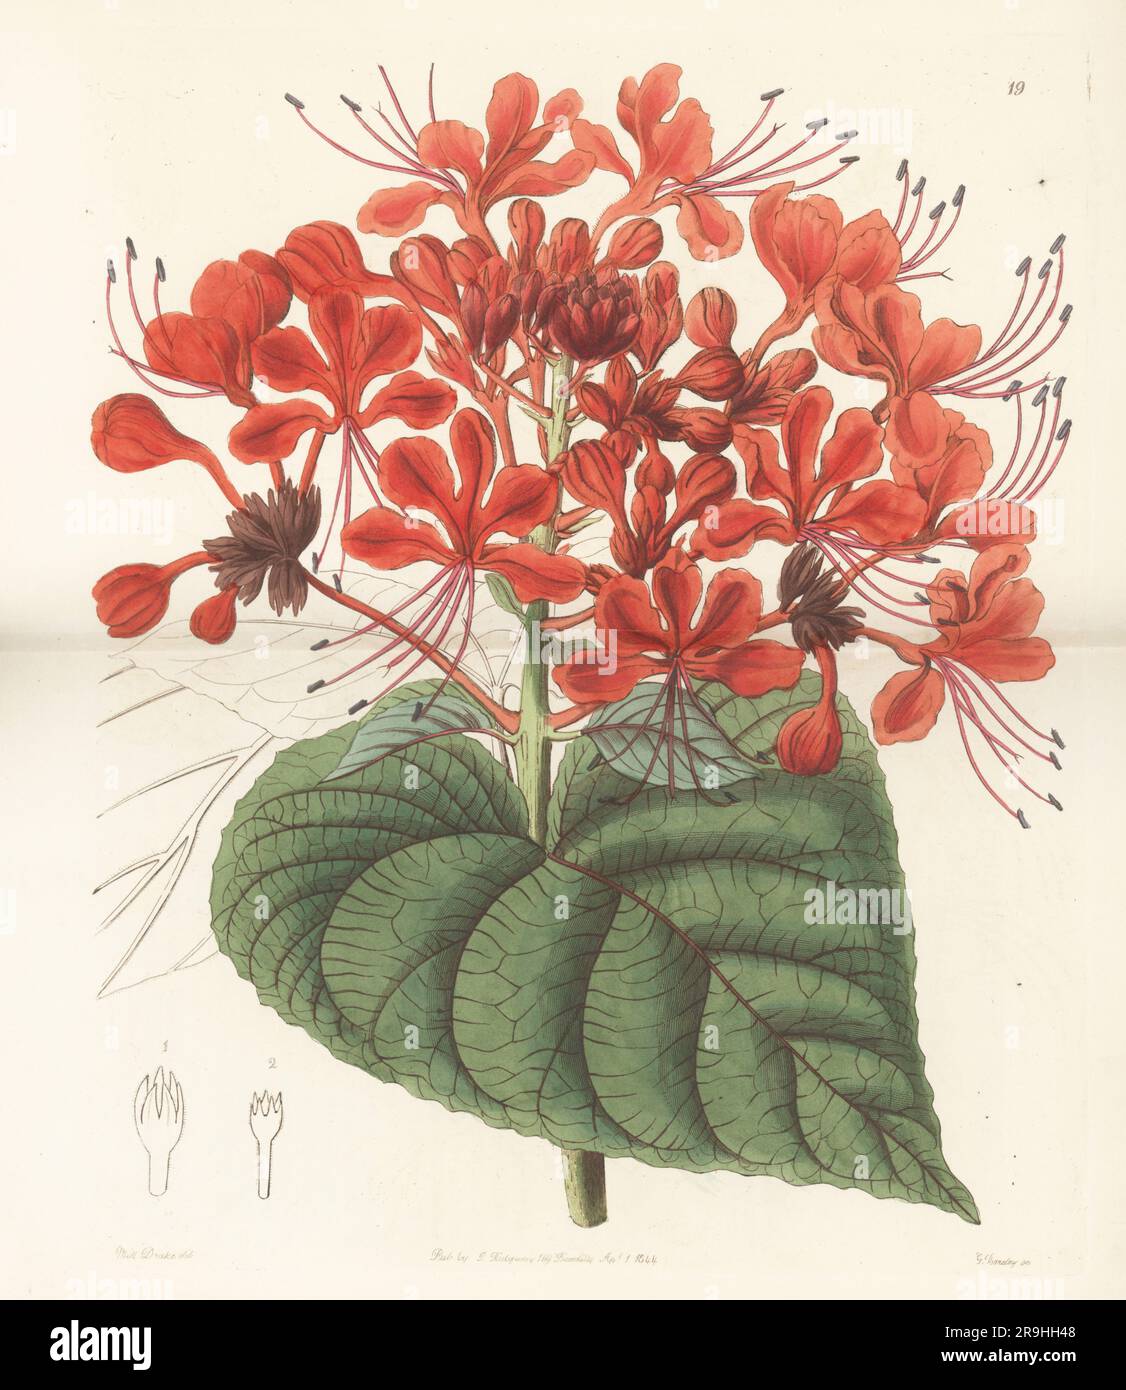 Bhat or hill glory bower, Clerodendrum infortunatum. Used in traditional Indian medicine and ayurveda. Flowered at the Duke of Northumberland's garden at Sion from seeds sent from Ceylon (Sri Lanka) by plant hunter Mr. Nightingale. Unlucky clerodendron, Clerodendron infortunatum. Handcoloured copperplate engraving by George Barclay after a botanical illustration by Sarah Drake from Edwards’ Botanical Register, continued by John Lindley, published by James Ridgway, London, 1844. Stock Photo